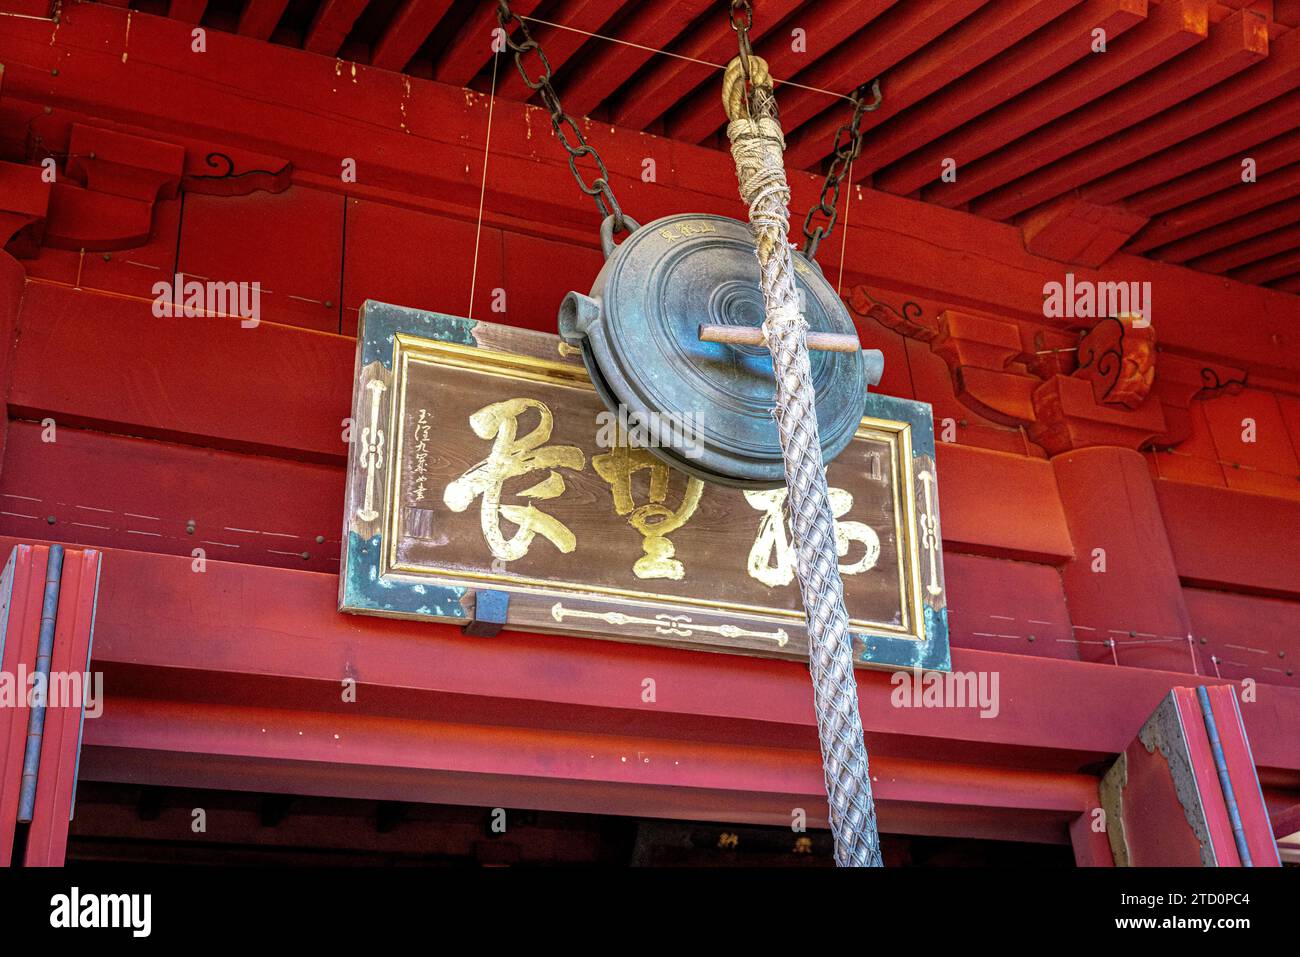 Detail of a bell in a temple in Ueno in Tokyo Stock Photo